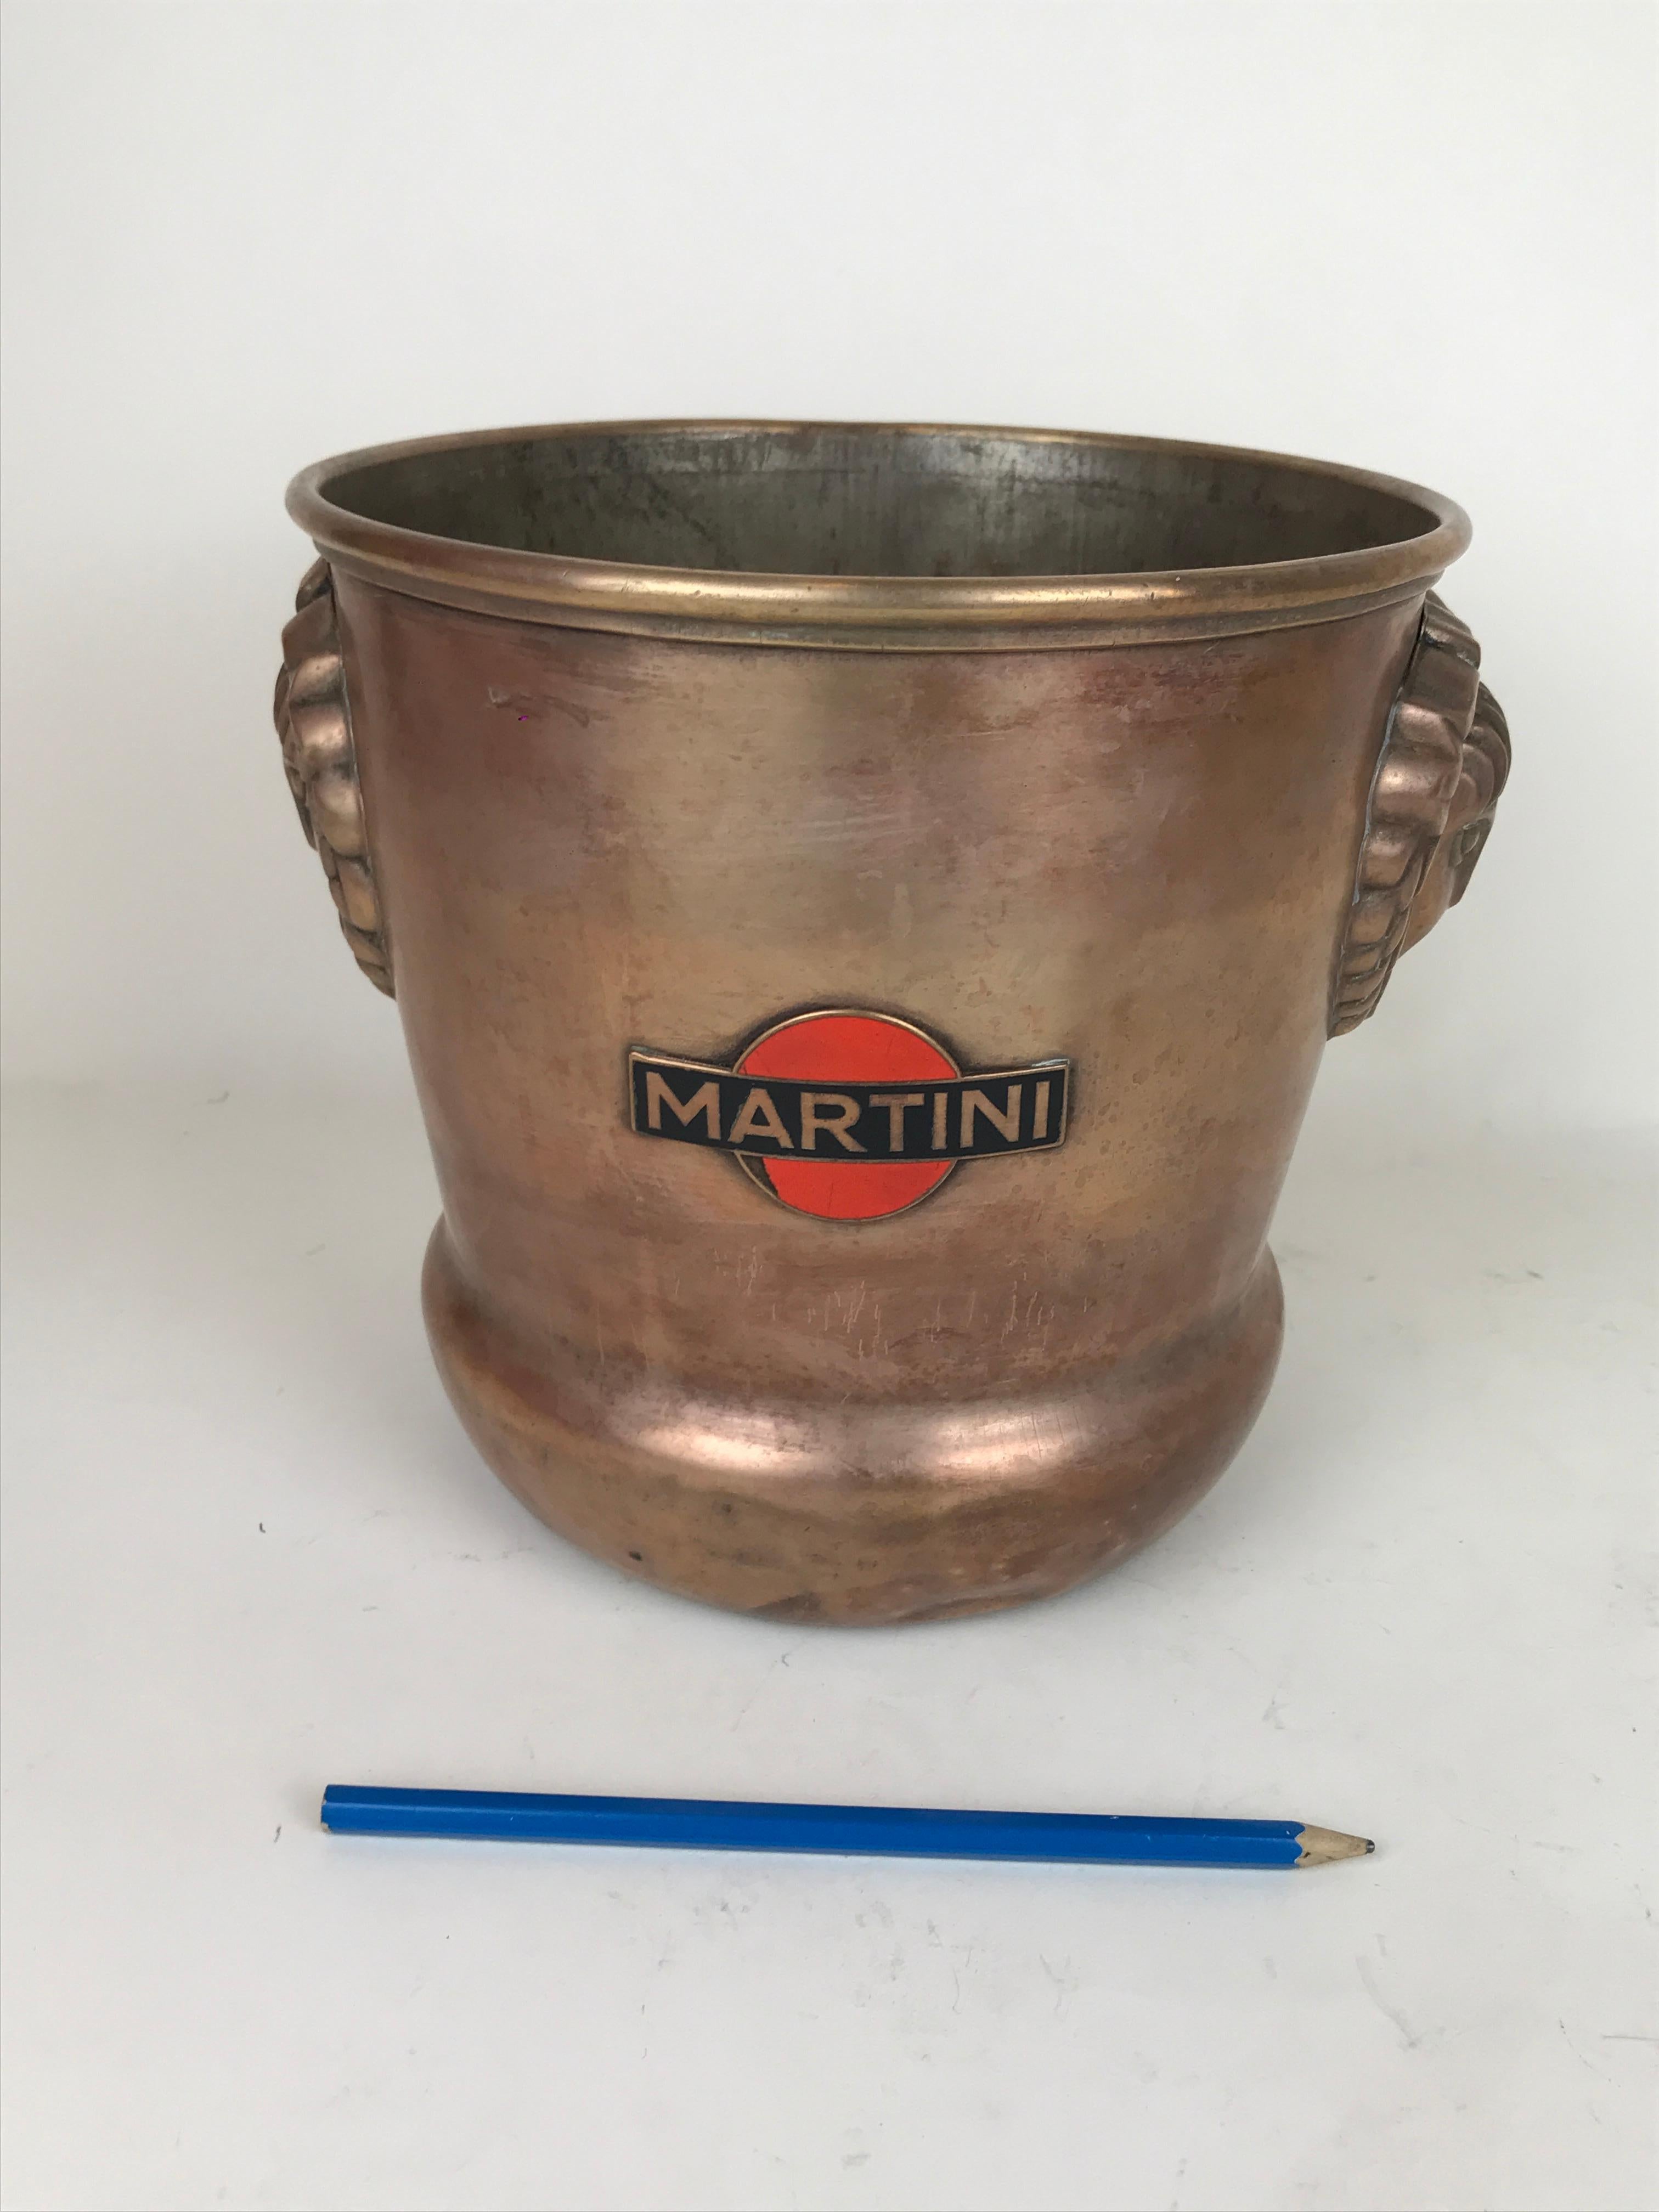 Splendid vintage Martini ice bucket by Martini in brass with side reliefs in the shape of Art Decò style faces of young girls, made by G. Strola in Turin Italy.
Both sides present metal enamel Martini logos.

Marked on bottom G. Strola